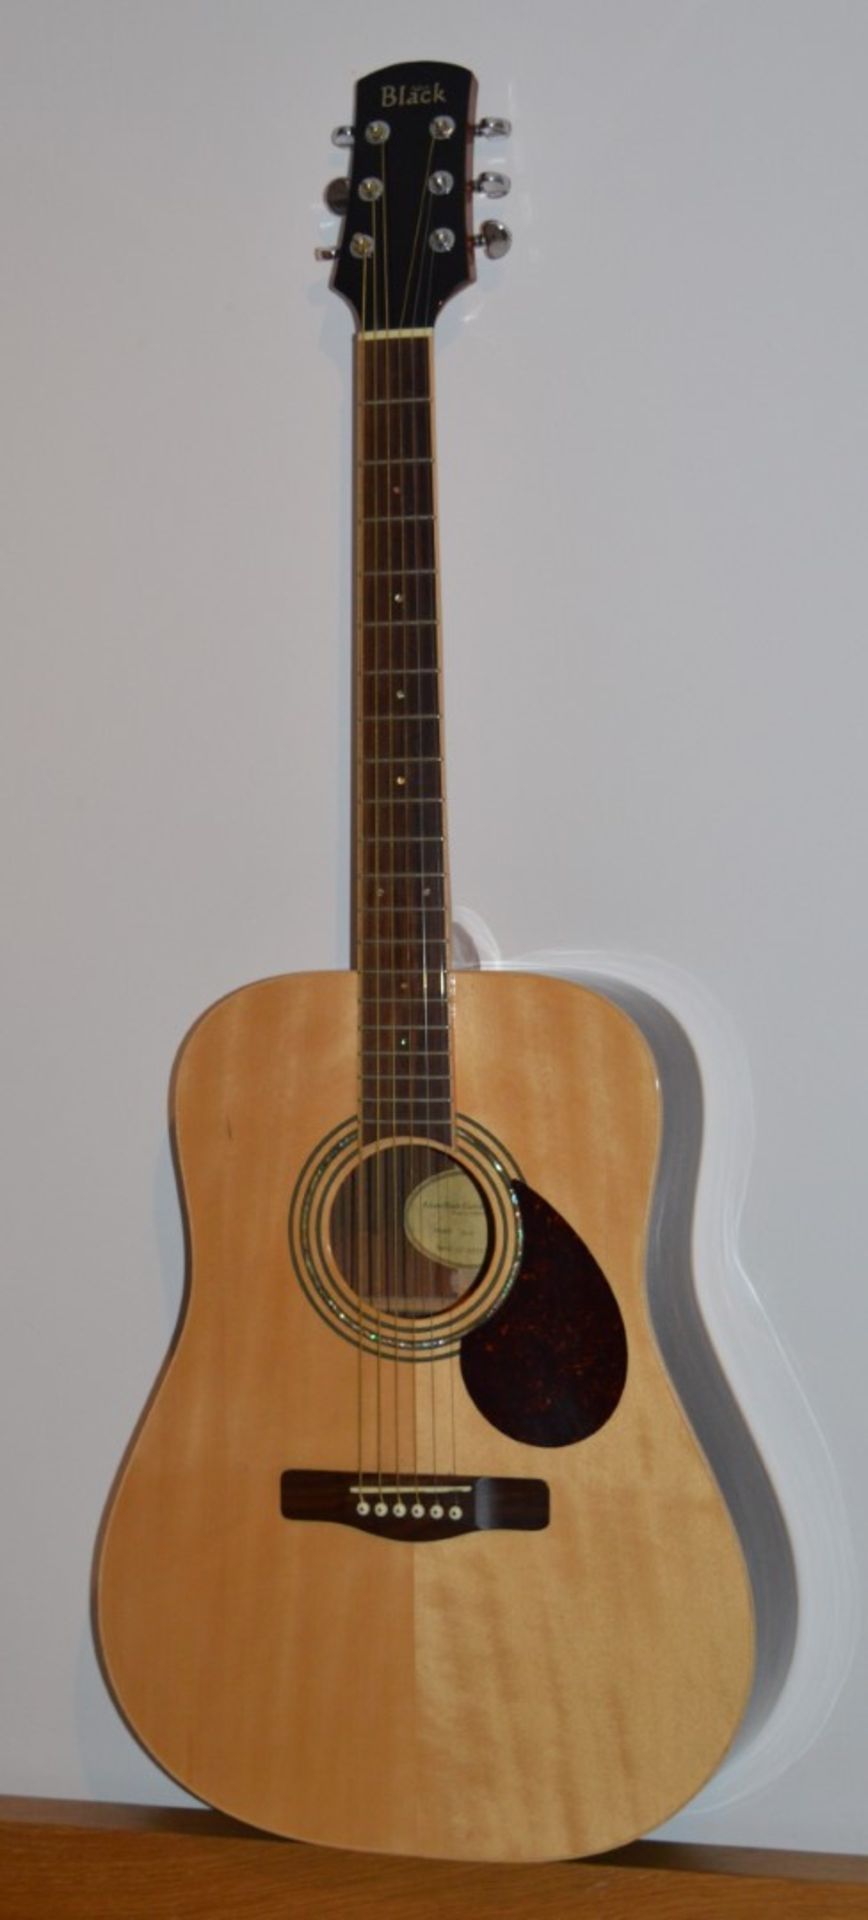 1 x Adam Black S6 Dreadnought Acoustic Guitar With Grover Machine Heads - CL010 - Ref J901 -